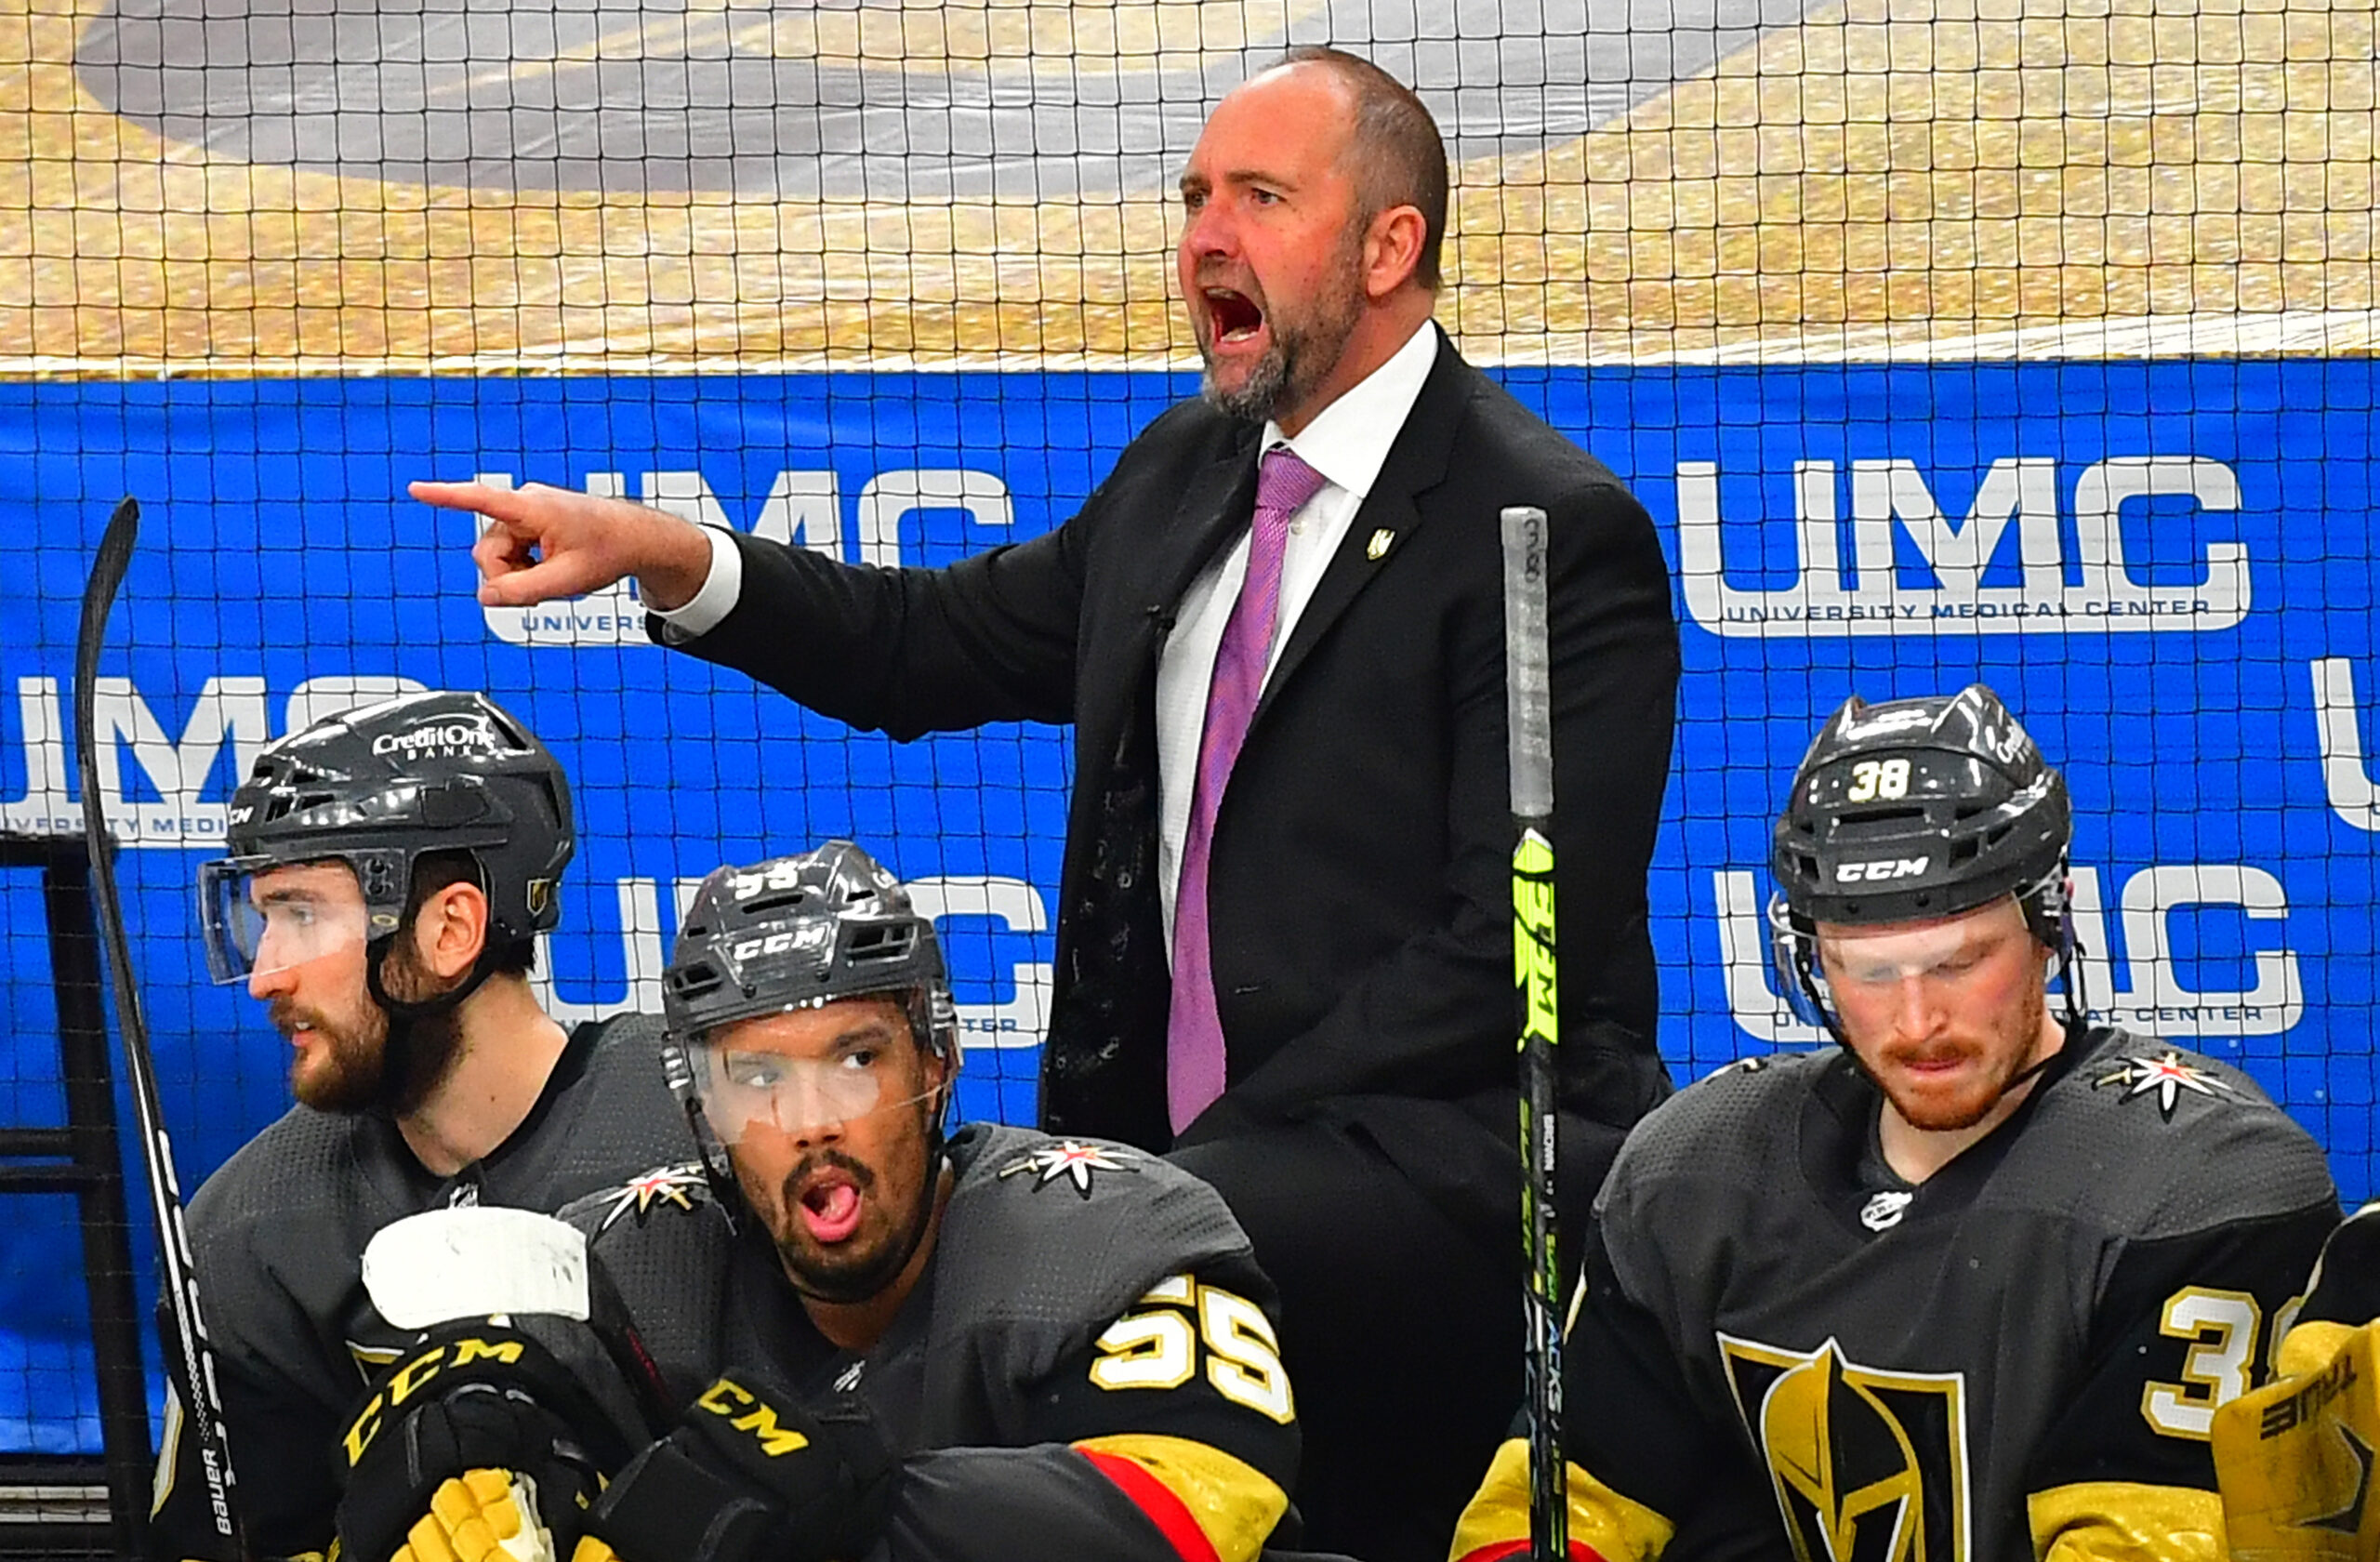 The Vegas Golden Knights added three new coaches to their staff